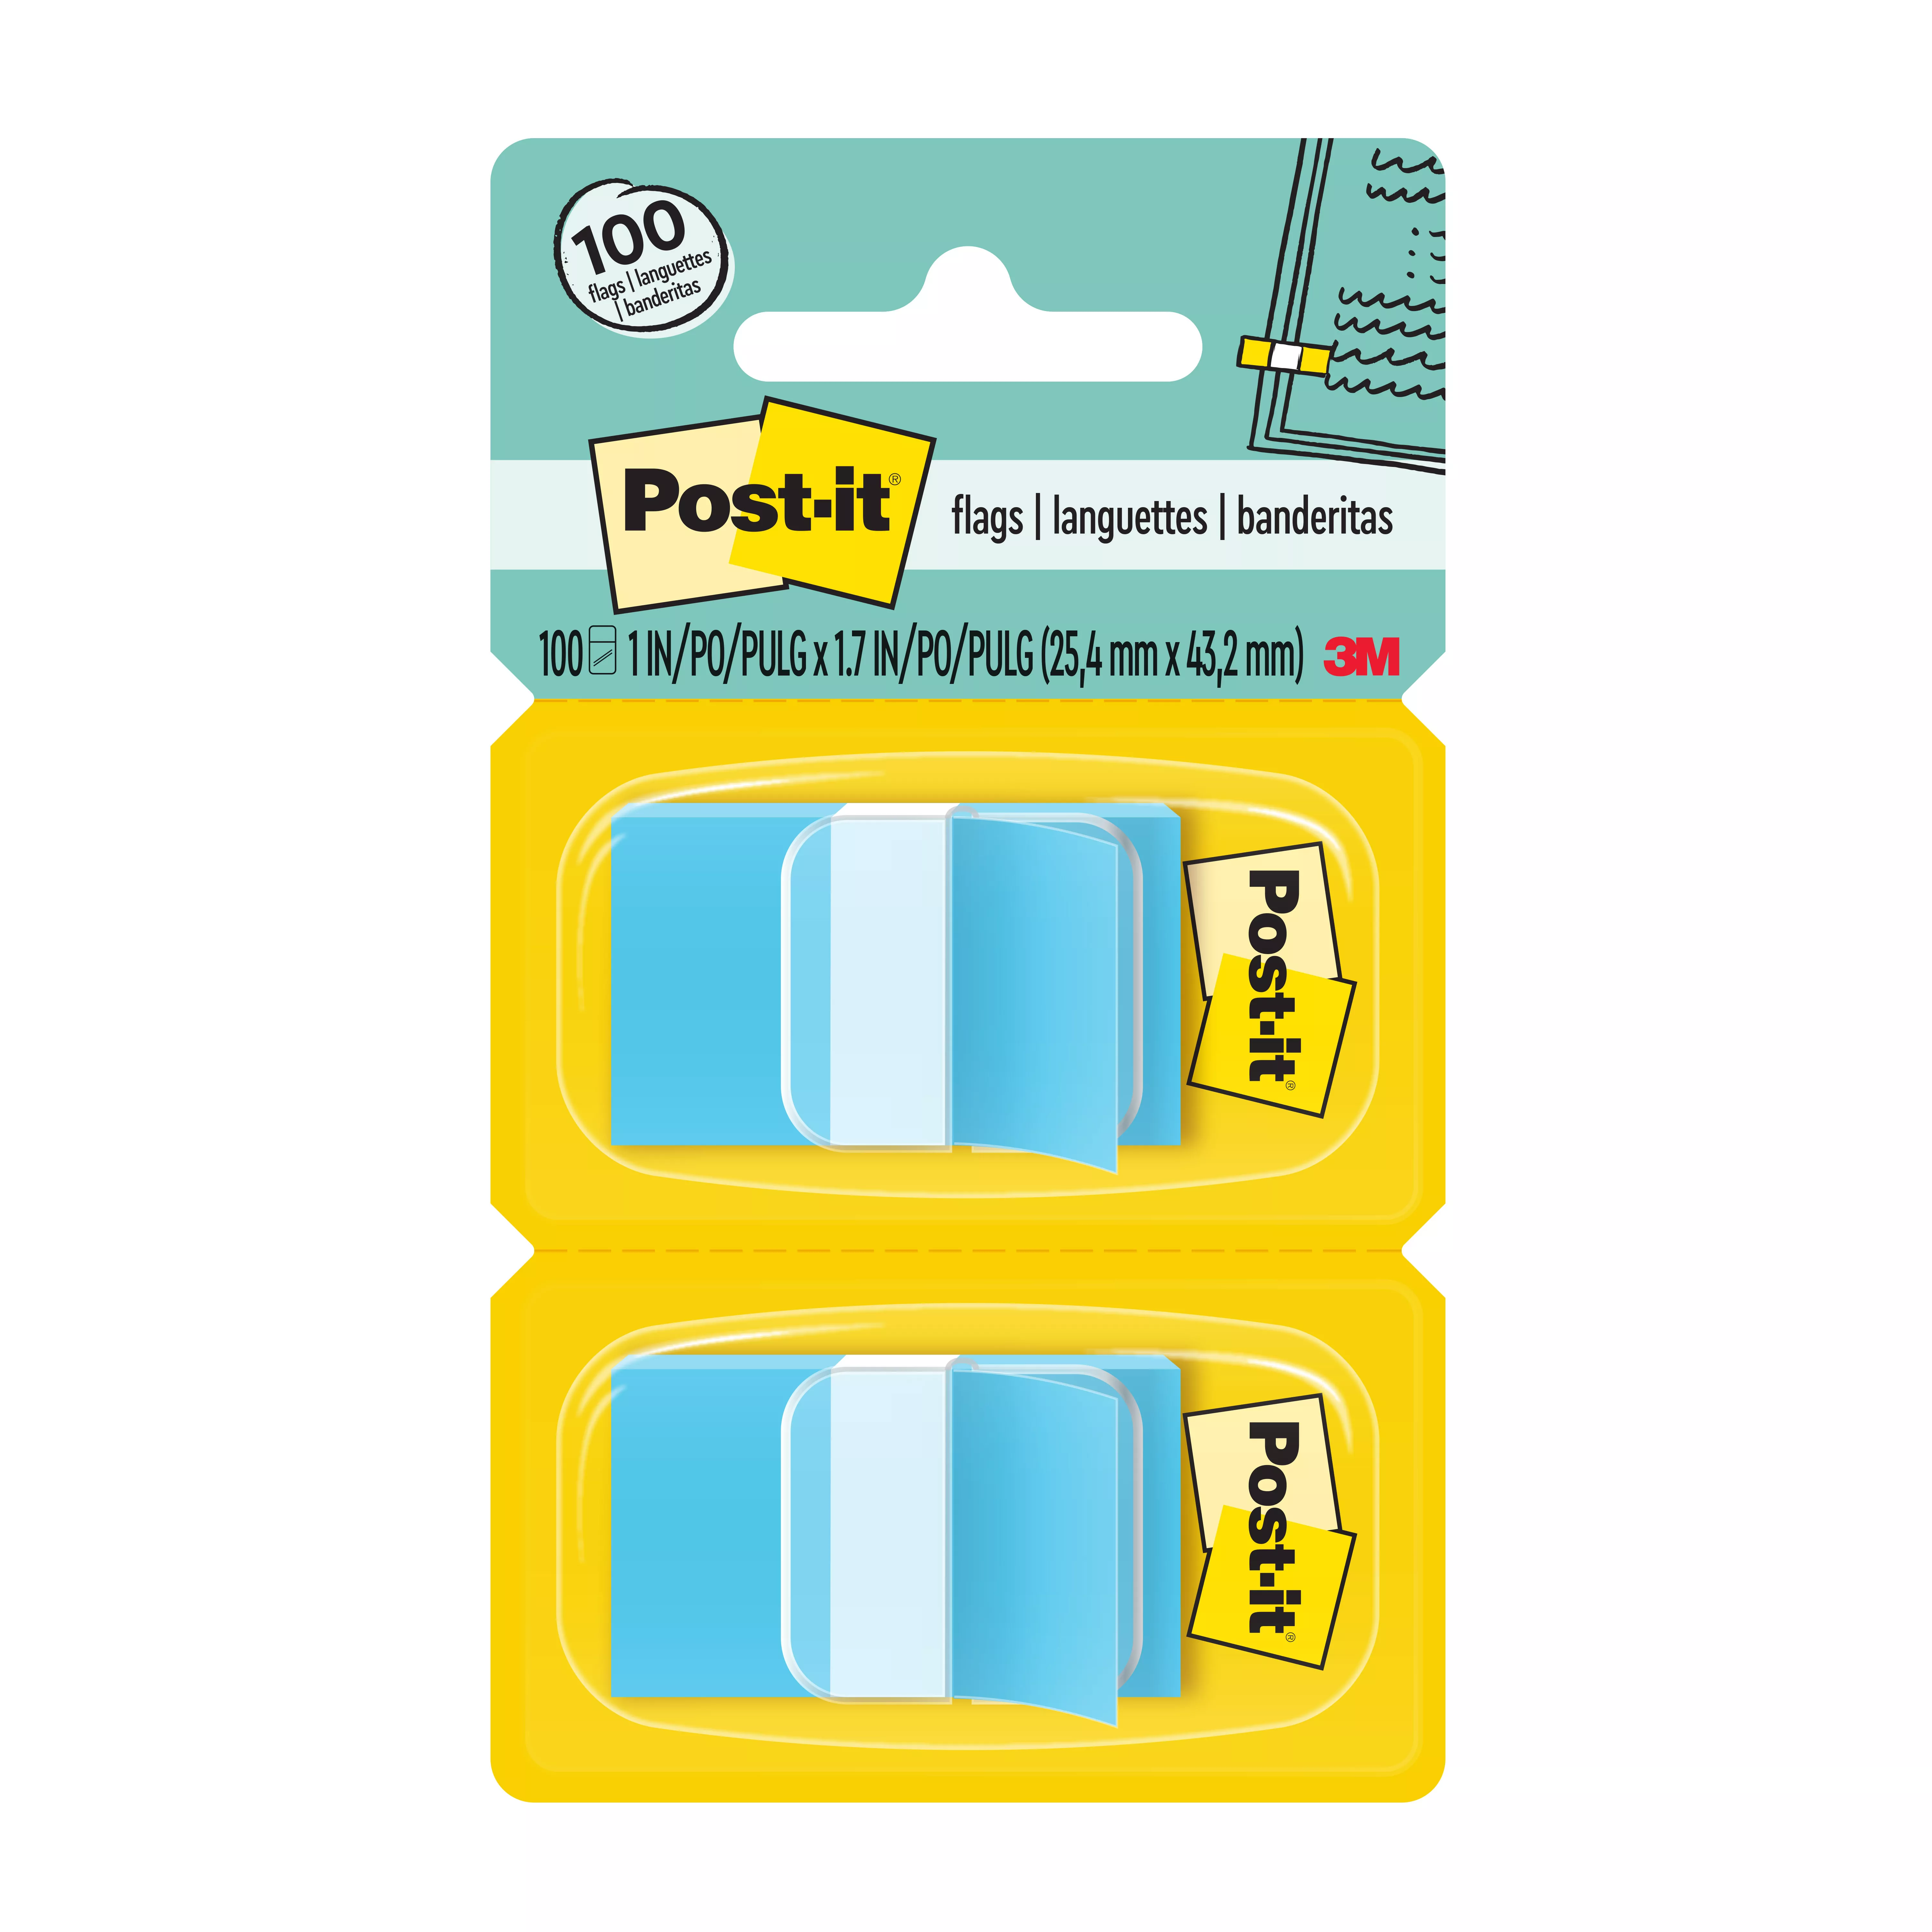 Post-it® Flags 680-BE2, 1 in. x 1.7 in. (2.54 cm x 4.31 cm) Blue, 2-pack